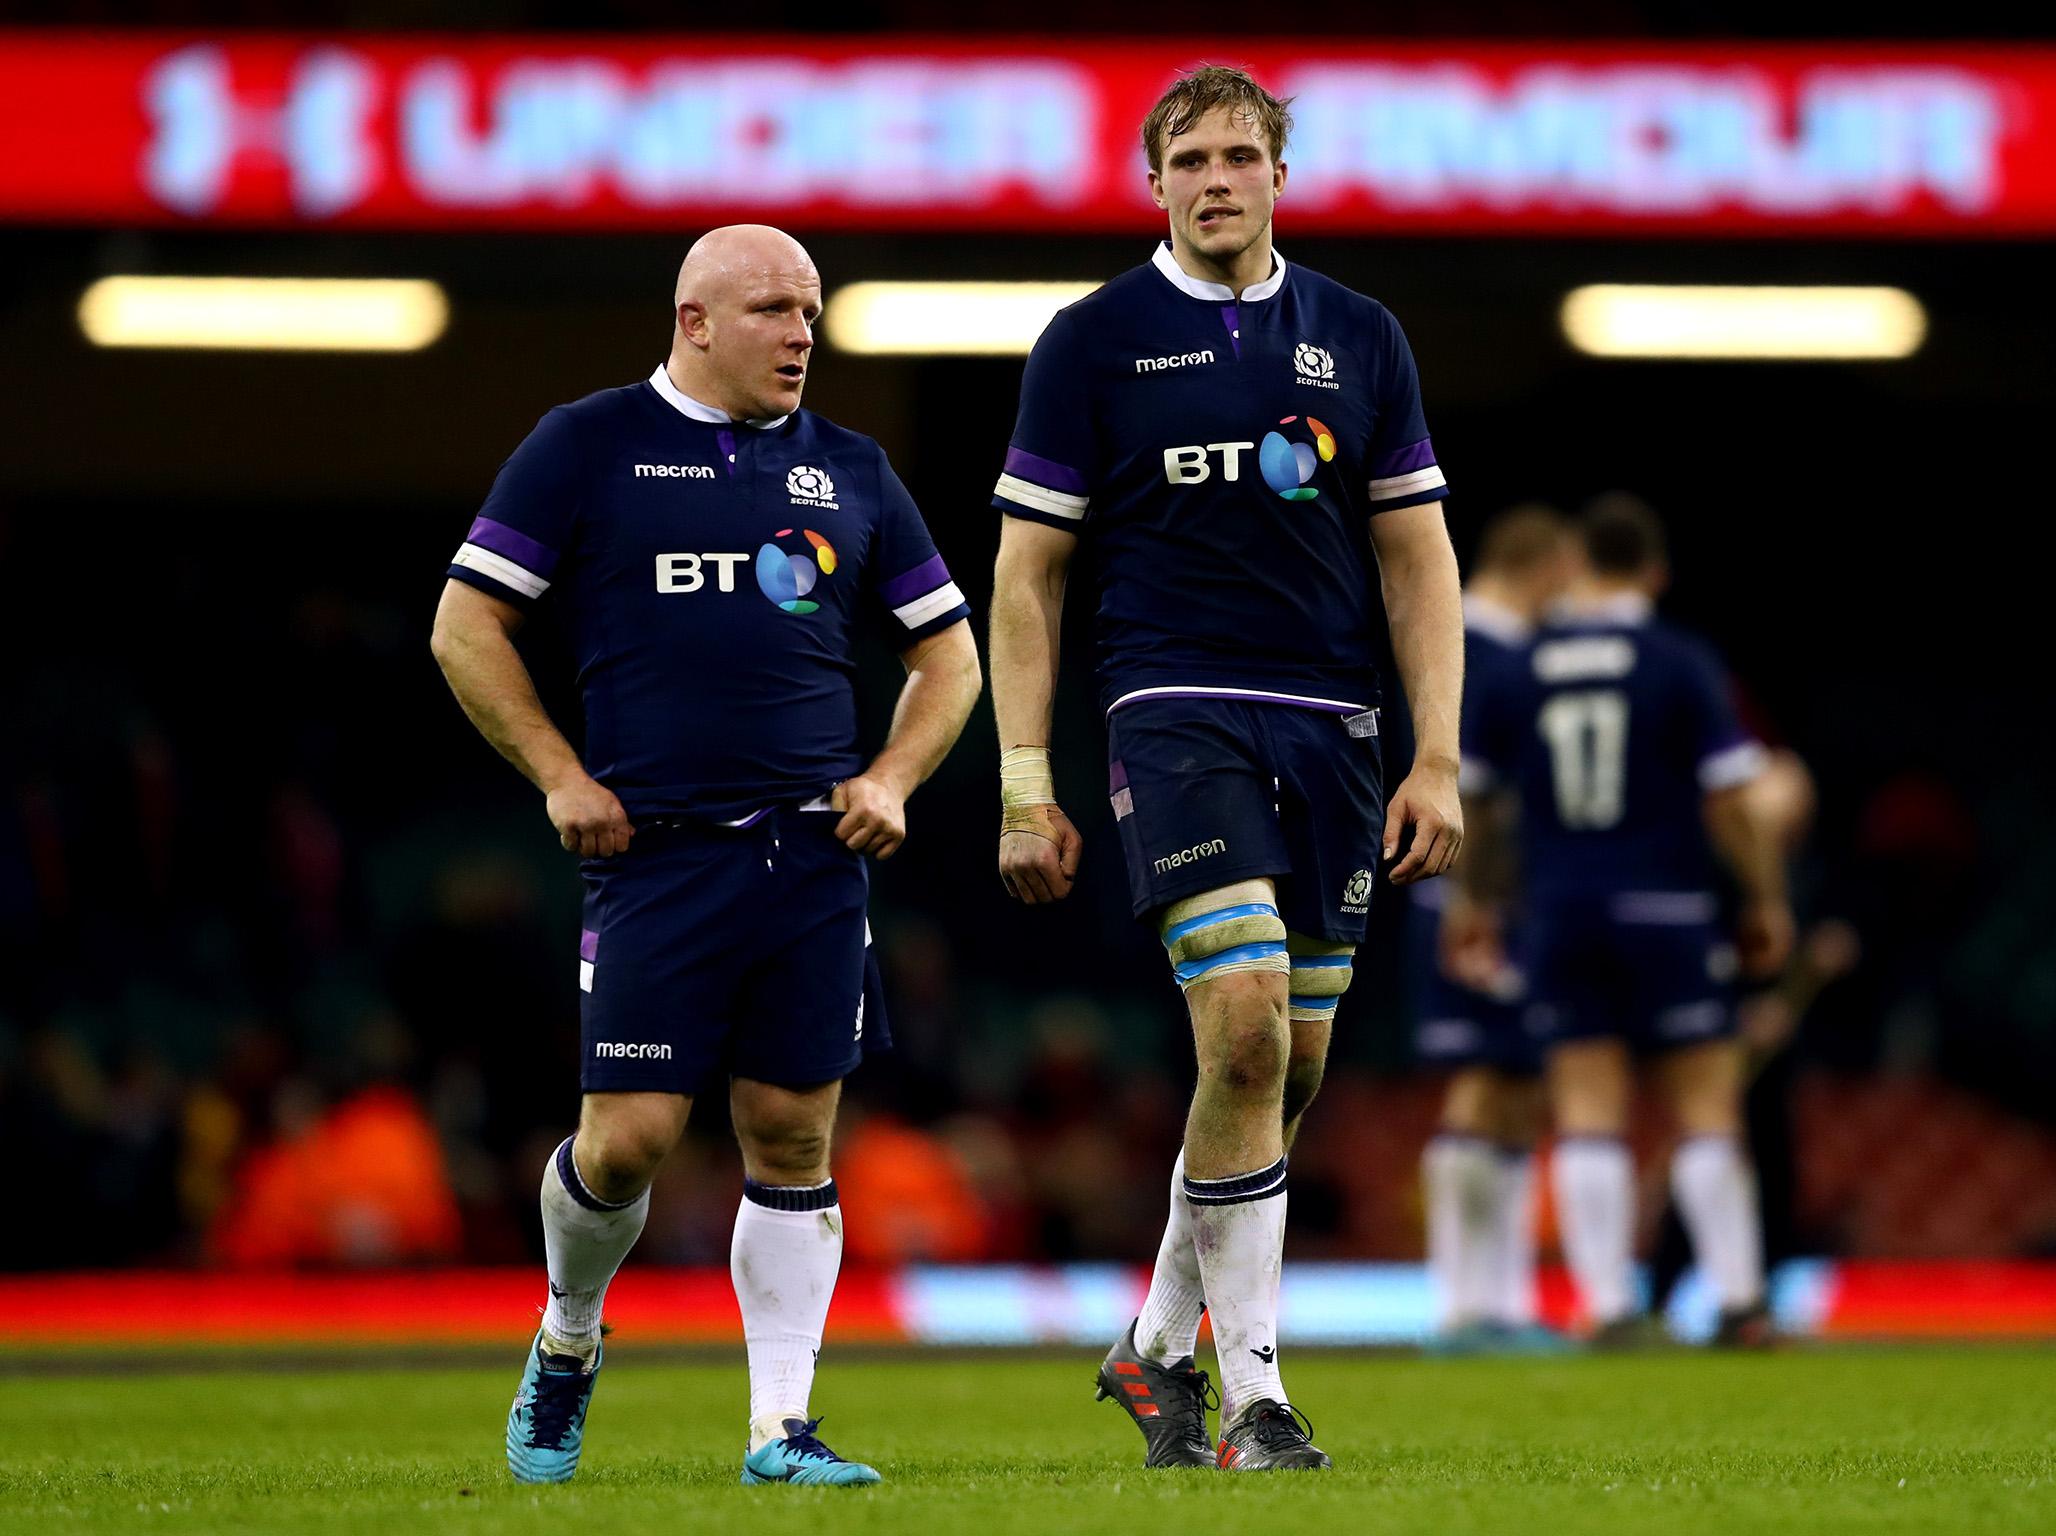 Scotland were left despondent after losing their Six Nations opener in Cardiff